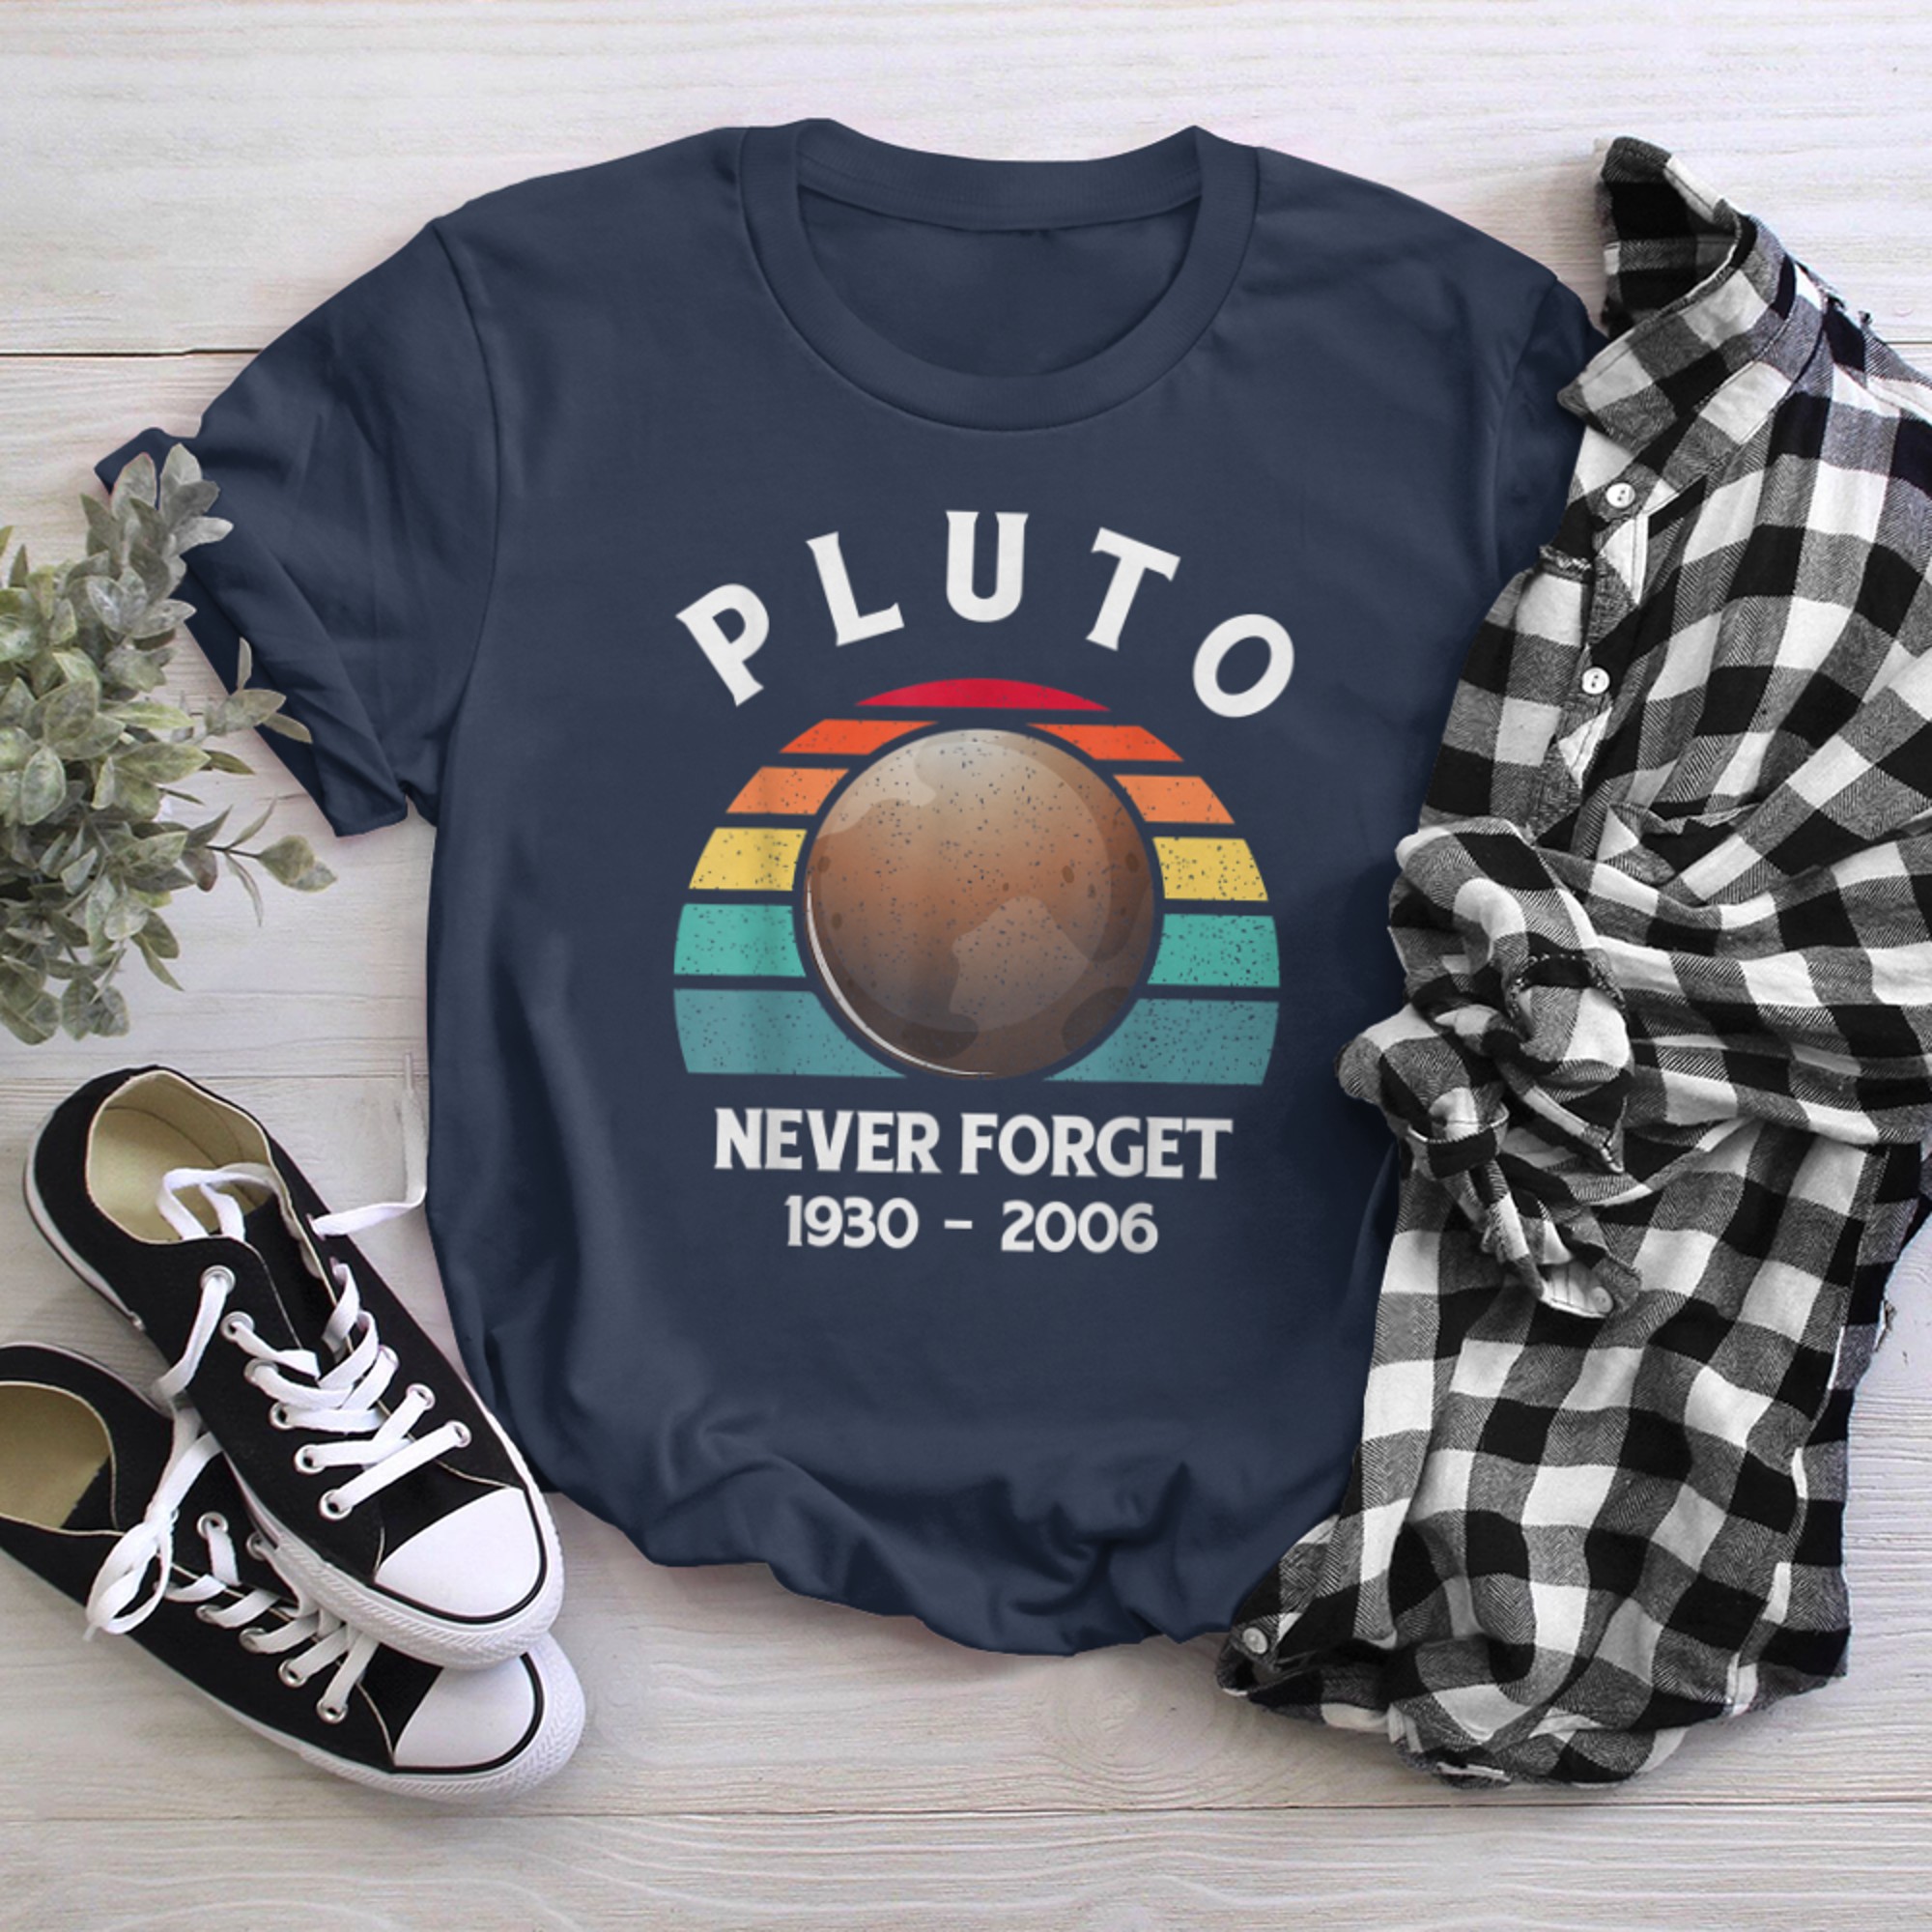 Pluto Never Forget Funny Science Geek & Space (1) t-shirt black